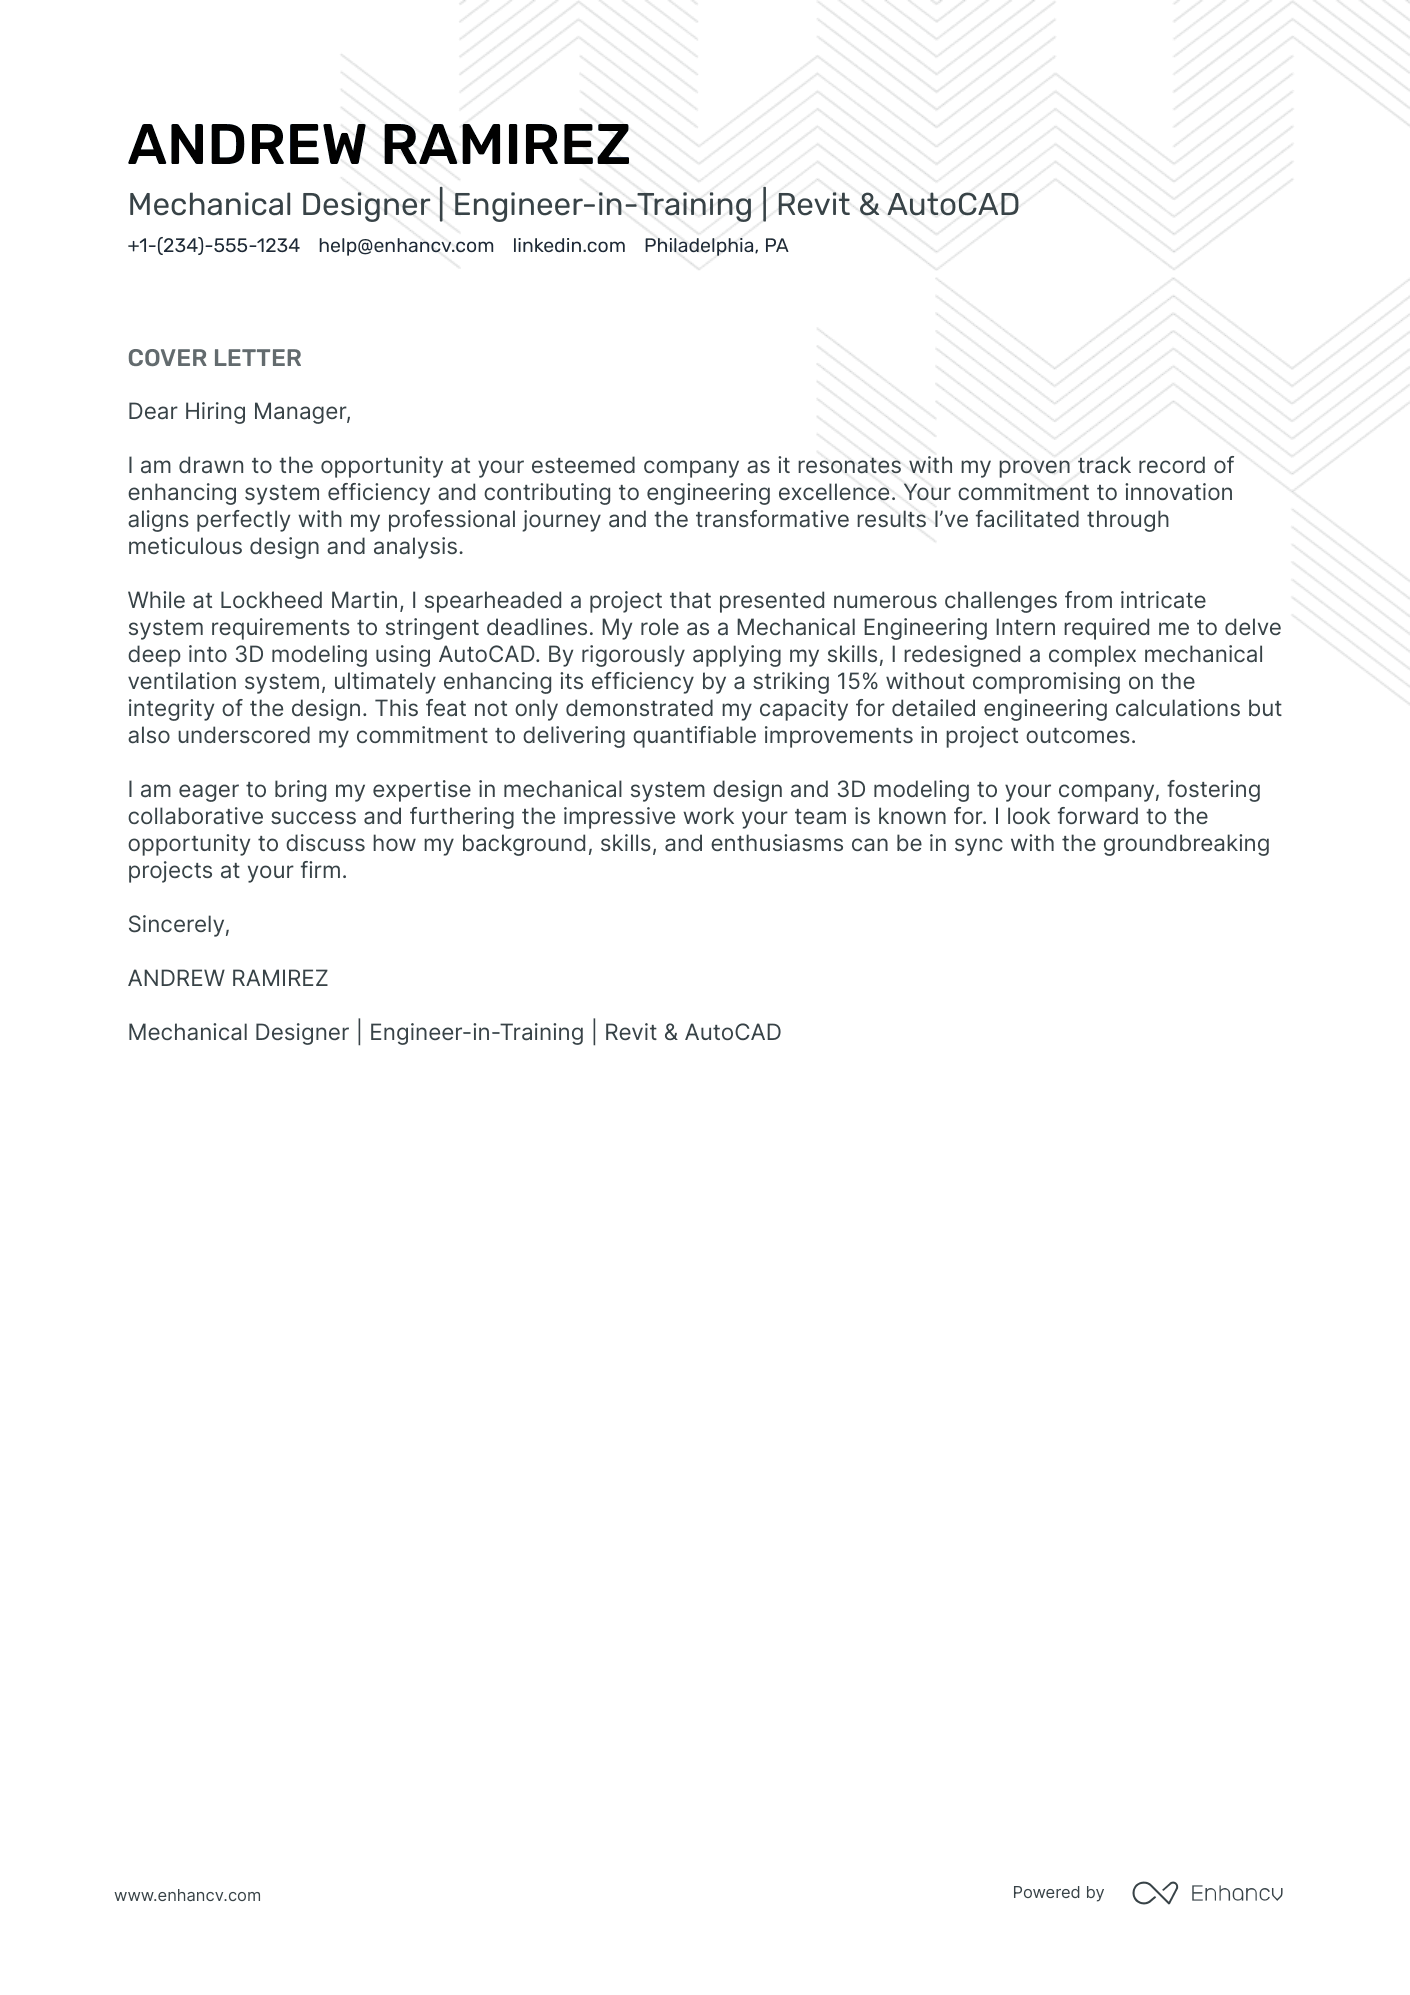 Engineer In Training cover letter